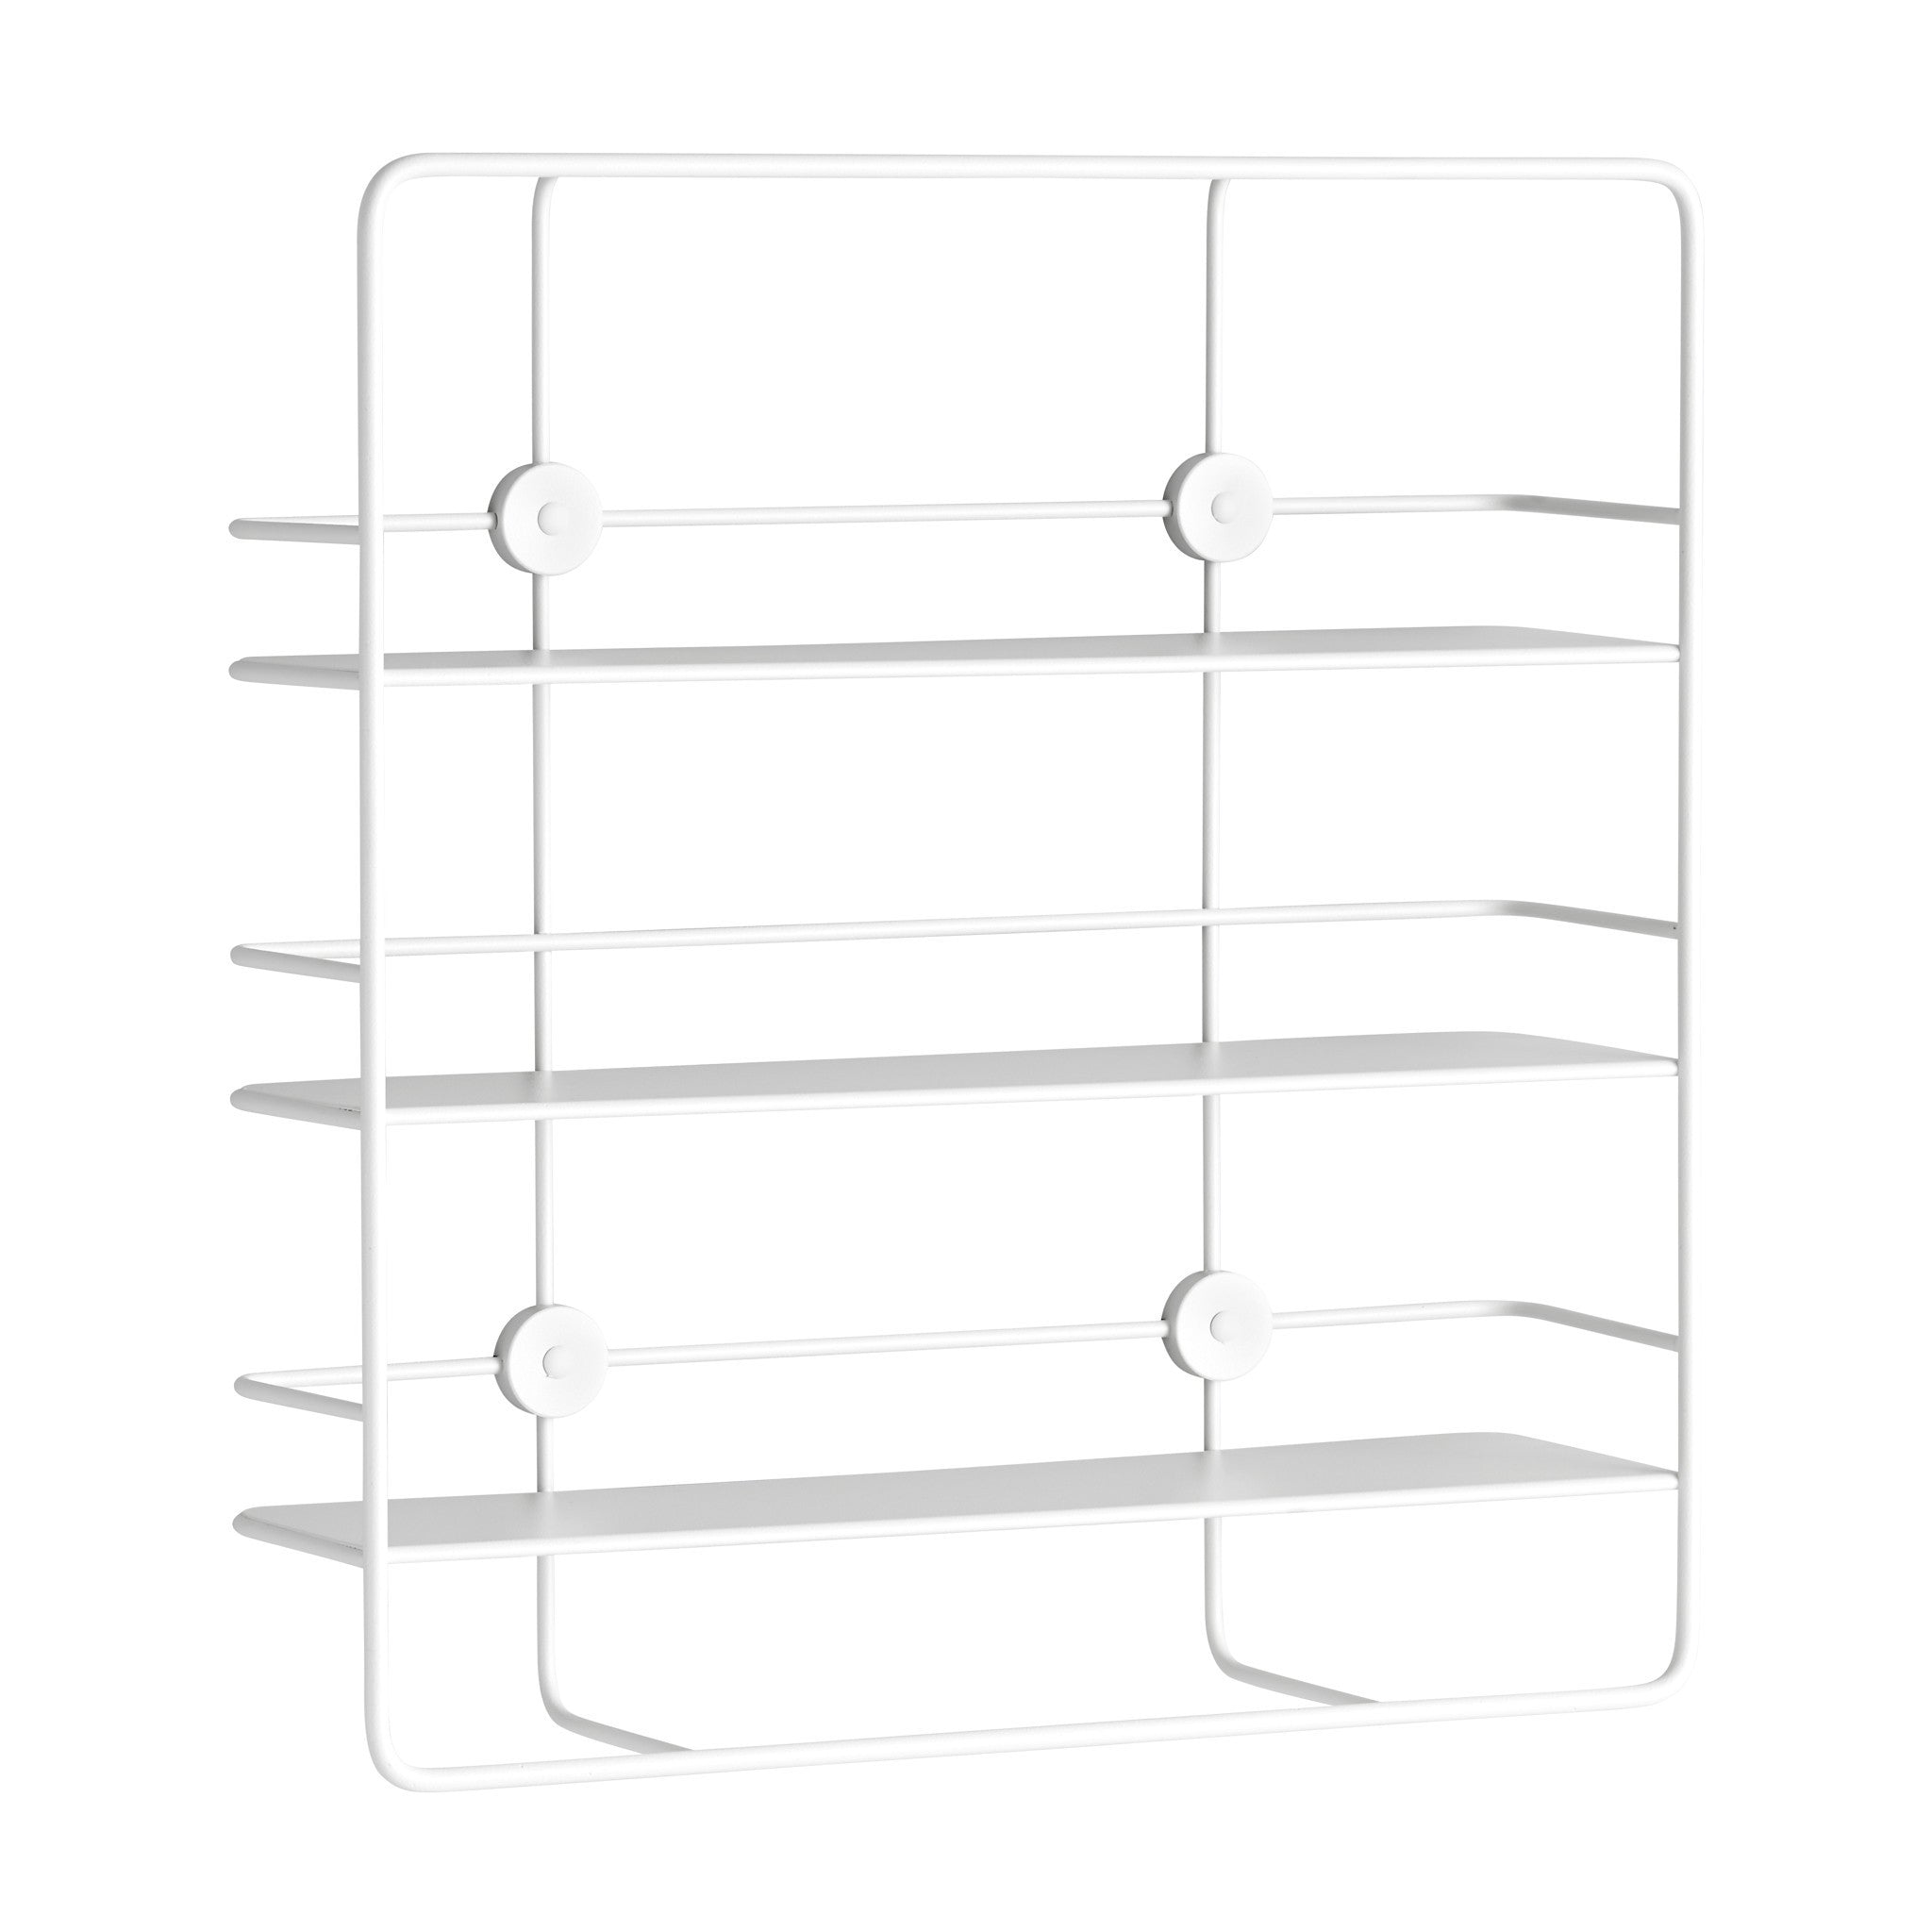 Clearance Coupé Rectangular Shelf / White by Poiat